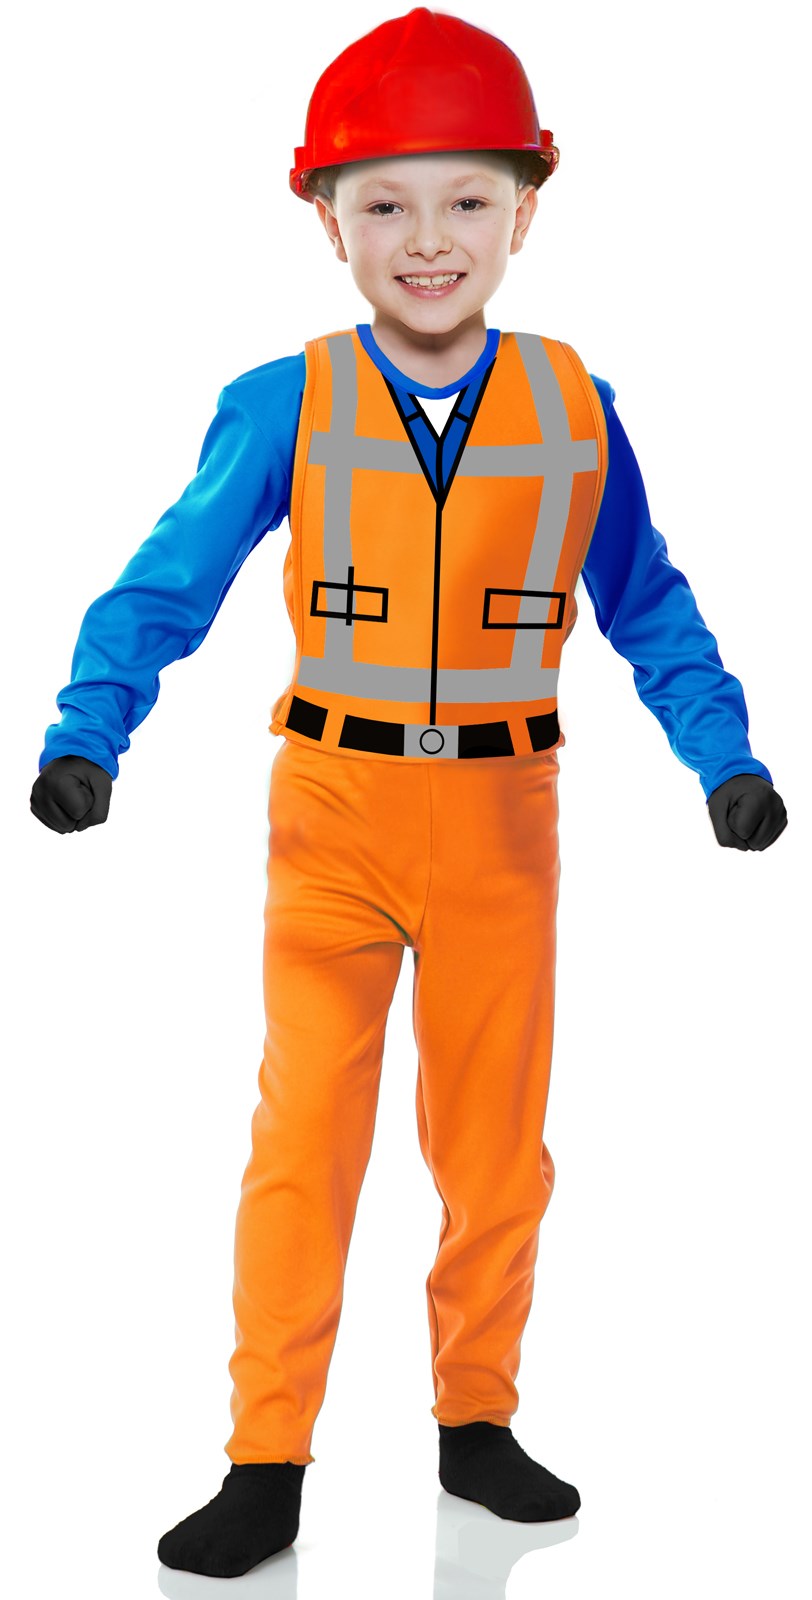 The Builder Costume For Kids